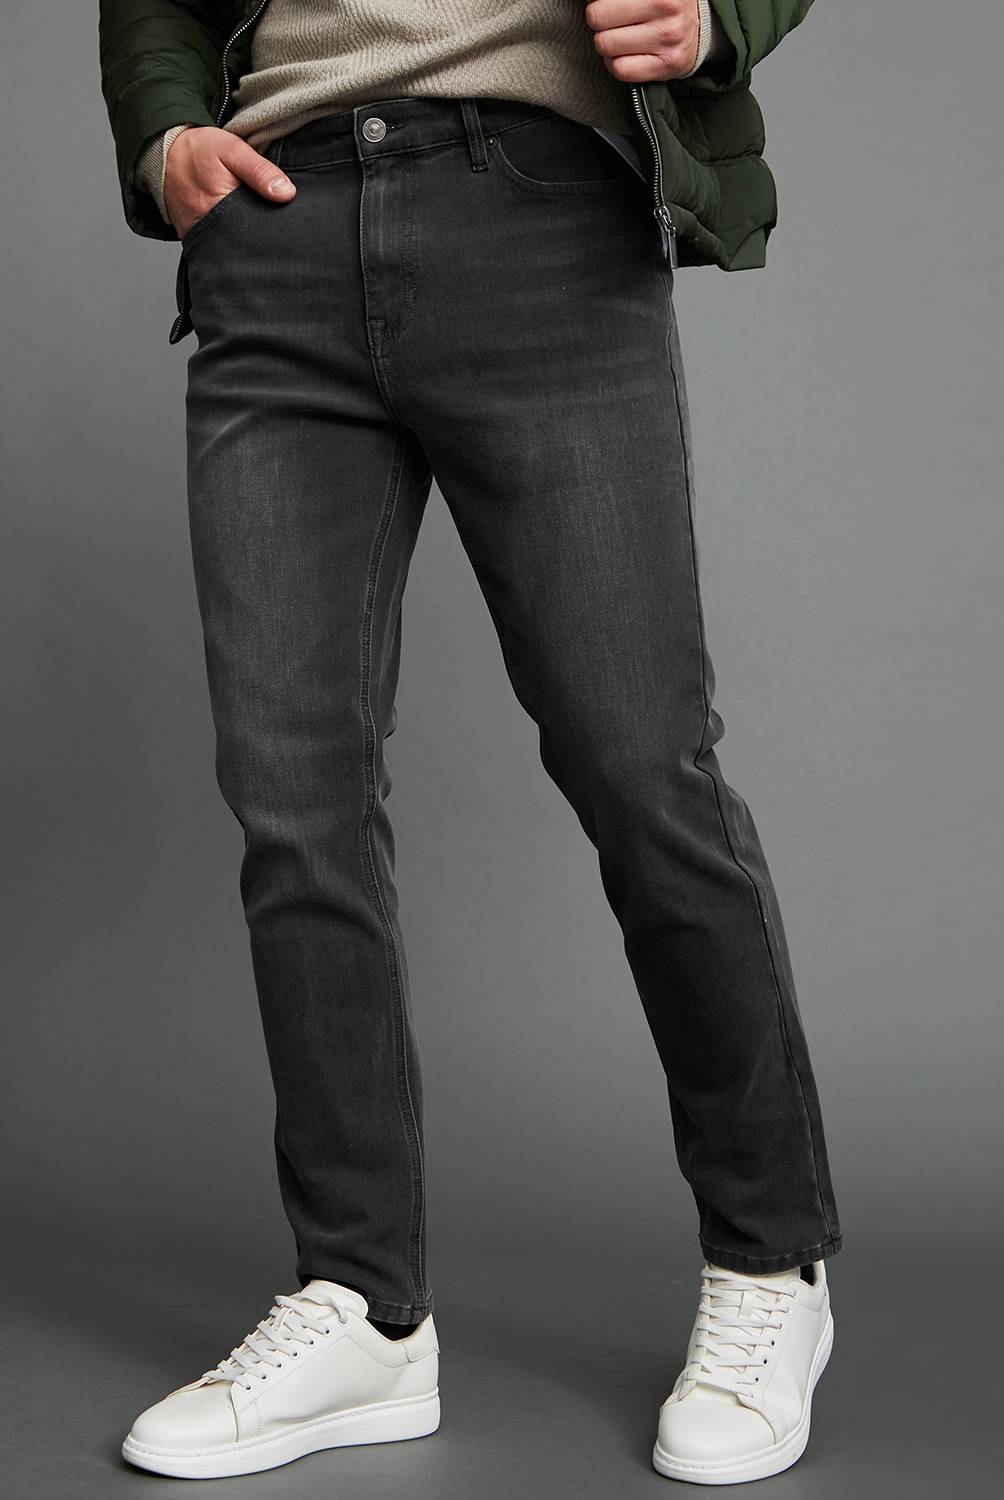 WOLF&HANK - Jeans Slim Fit 4way stretch Hombre